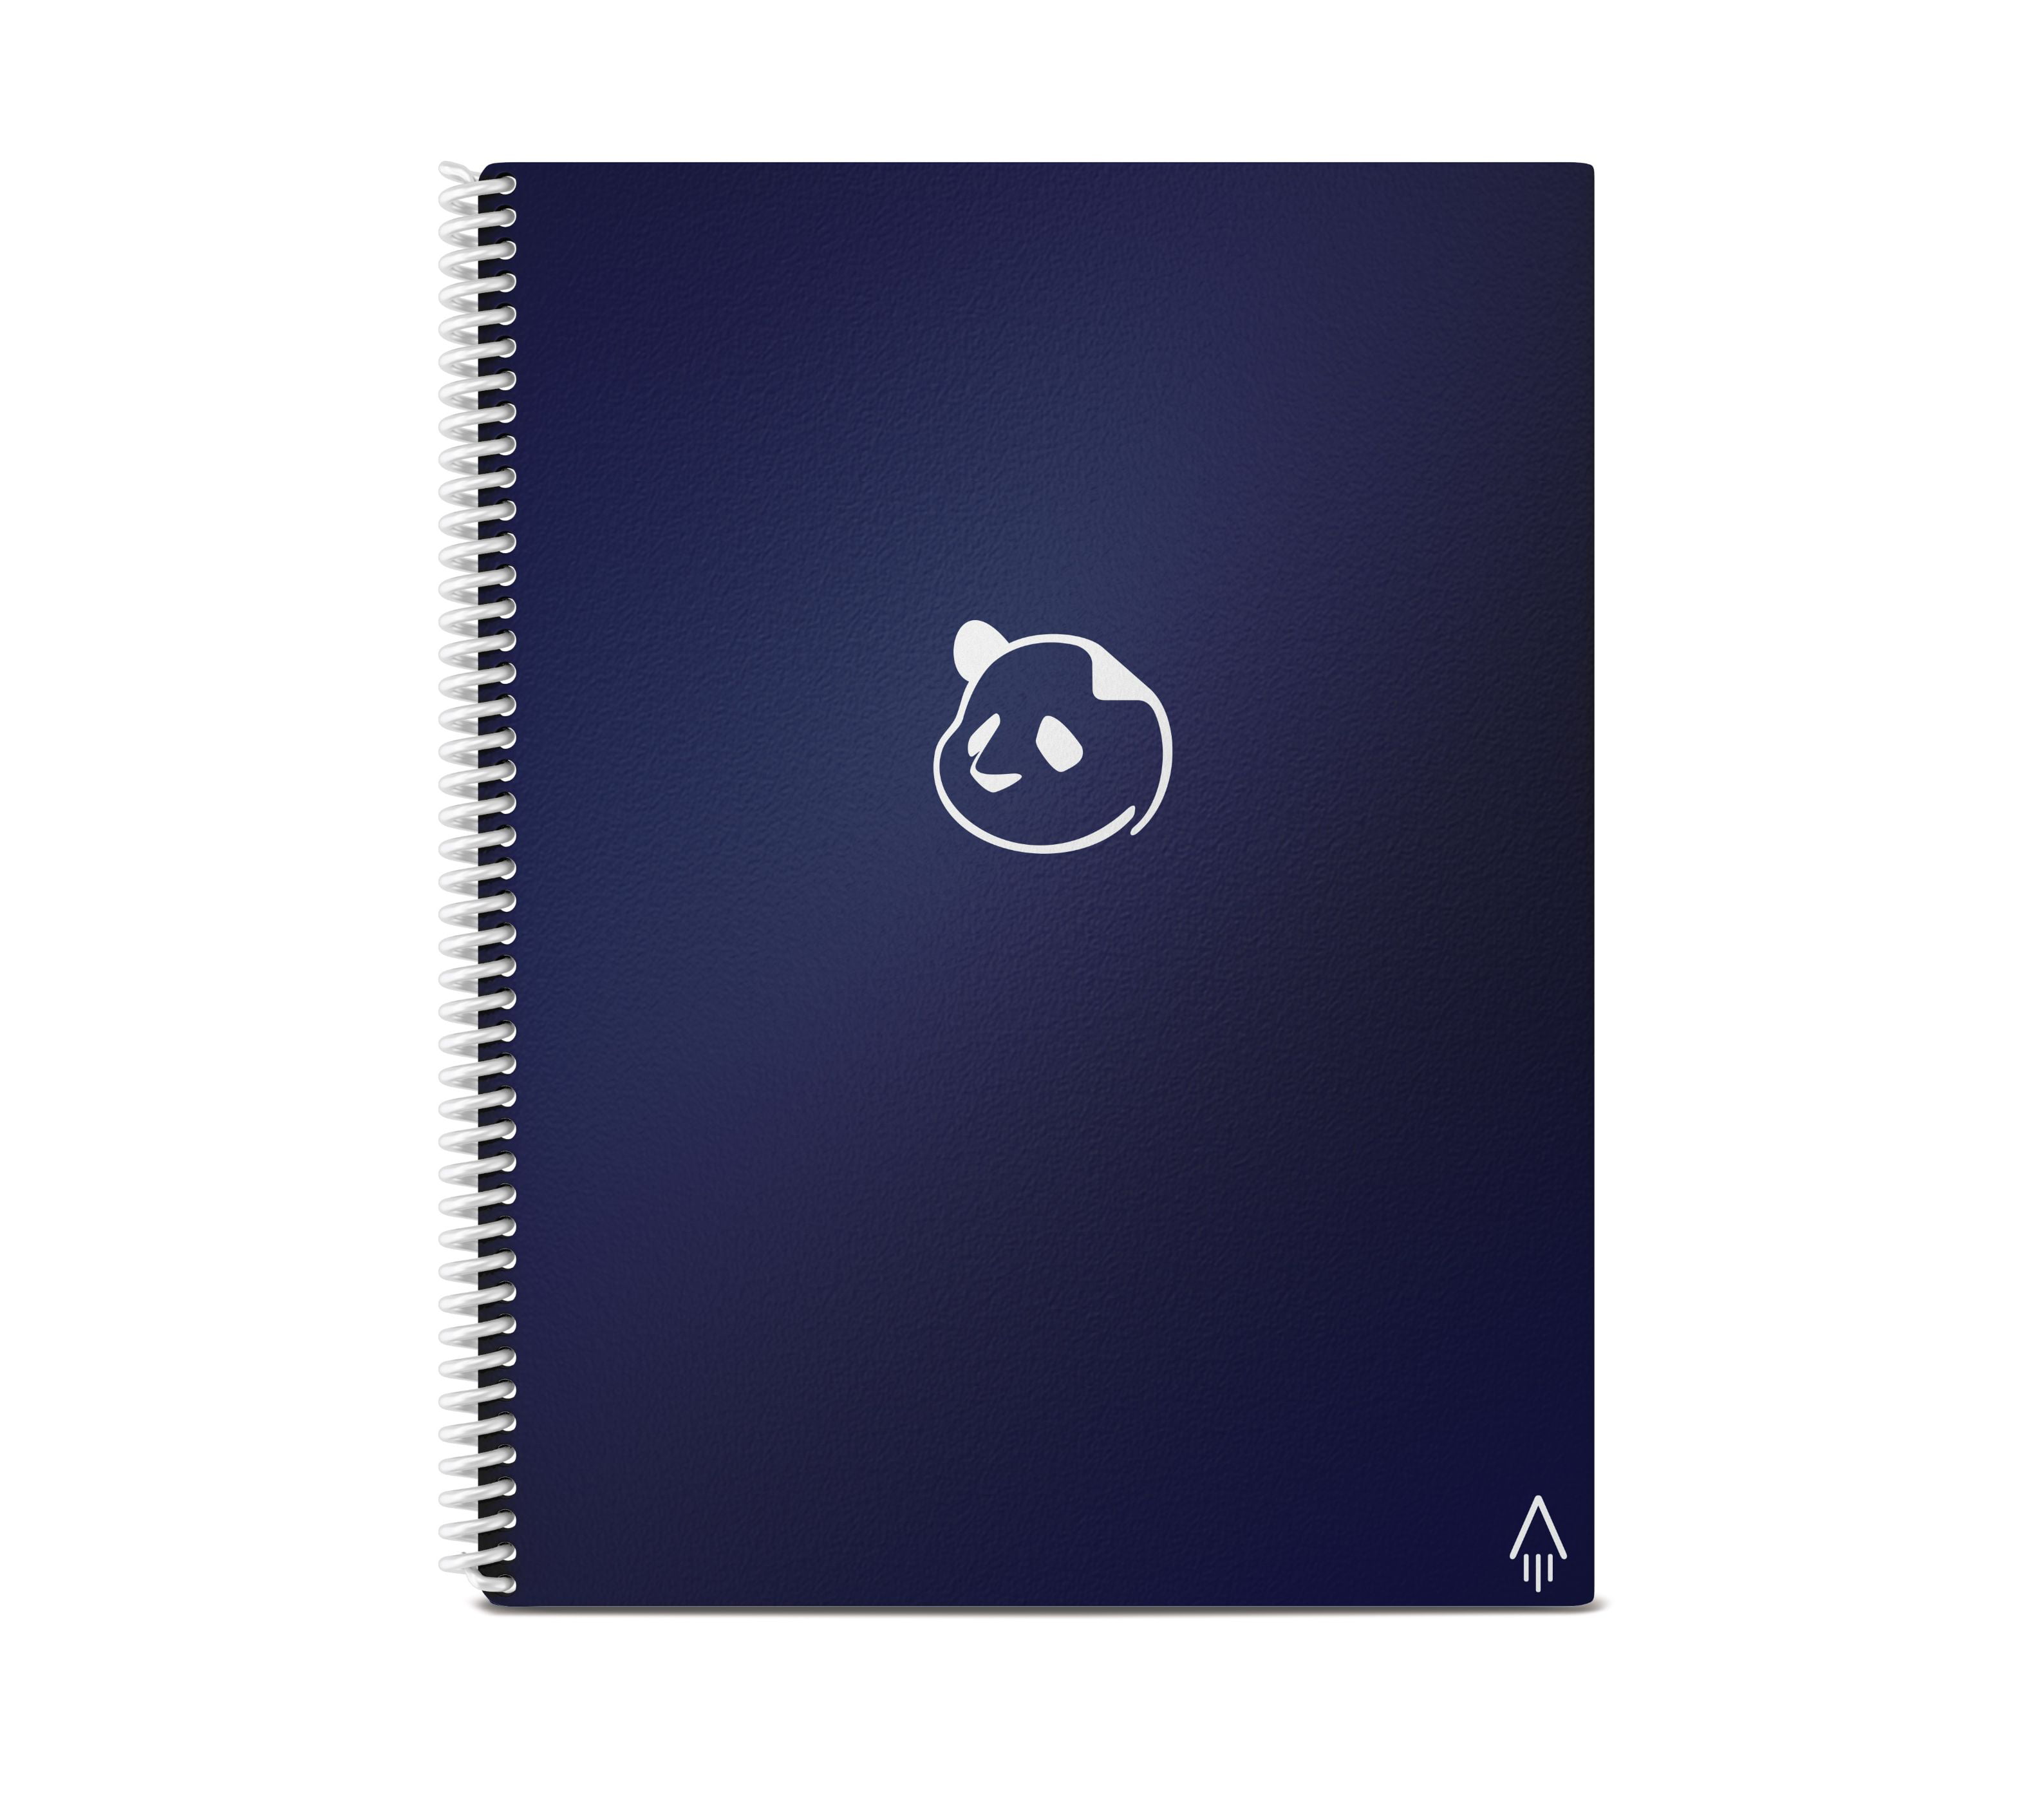 Rocketbook Reusable and Sustainable Smart Spiral Panda Planner, Undated -  Maroon - Letter Size Eco-friendly Notebook (8.5 x 11) - Daily, Weekly,  Monthly Planner Pages 